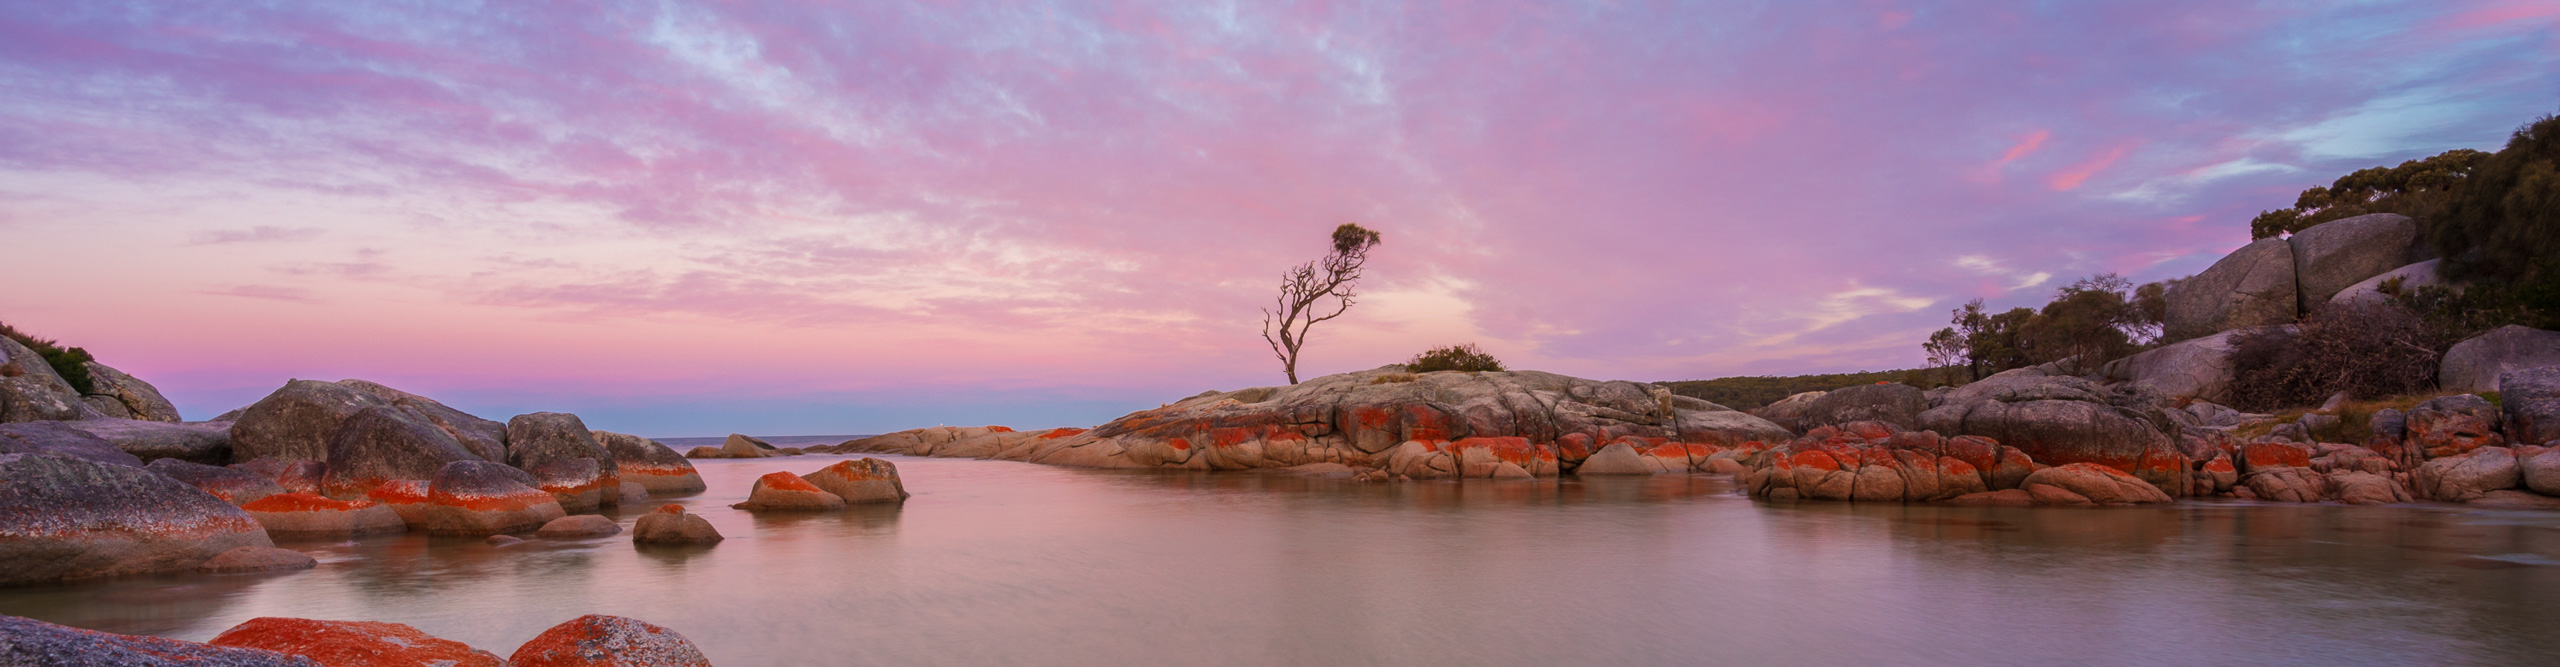 Bay of Fires at sunset, with a pink and blue sky, and calm water, Tasmania, Australia